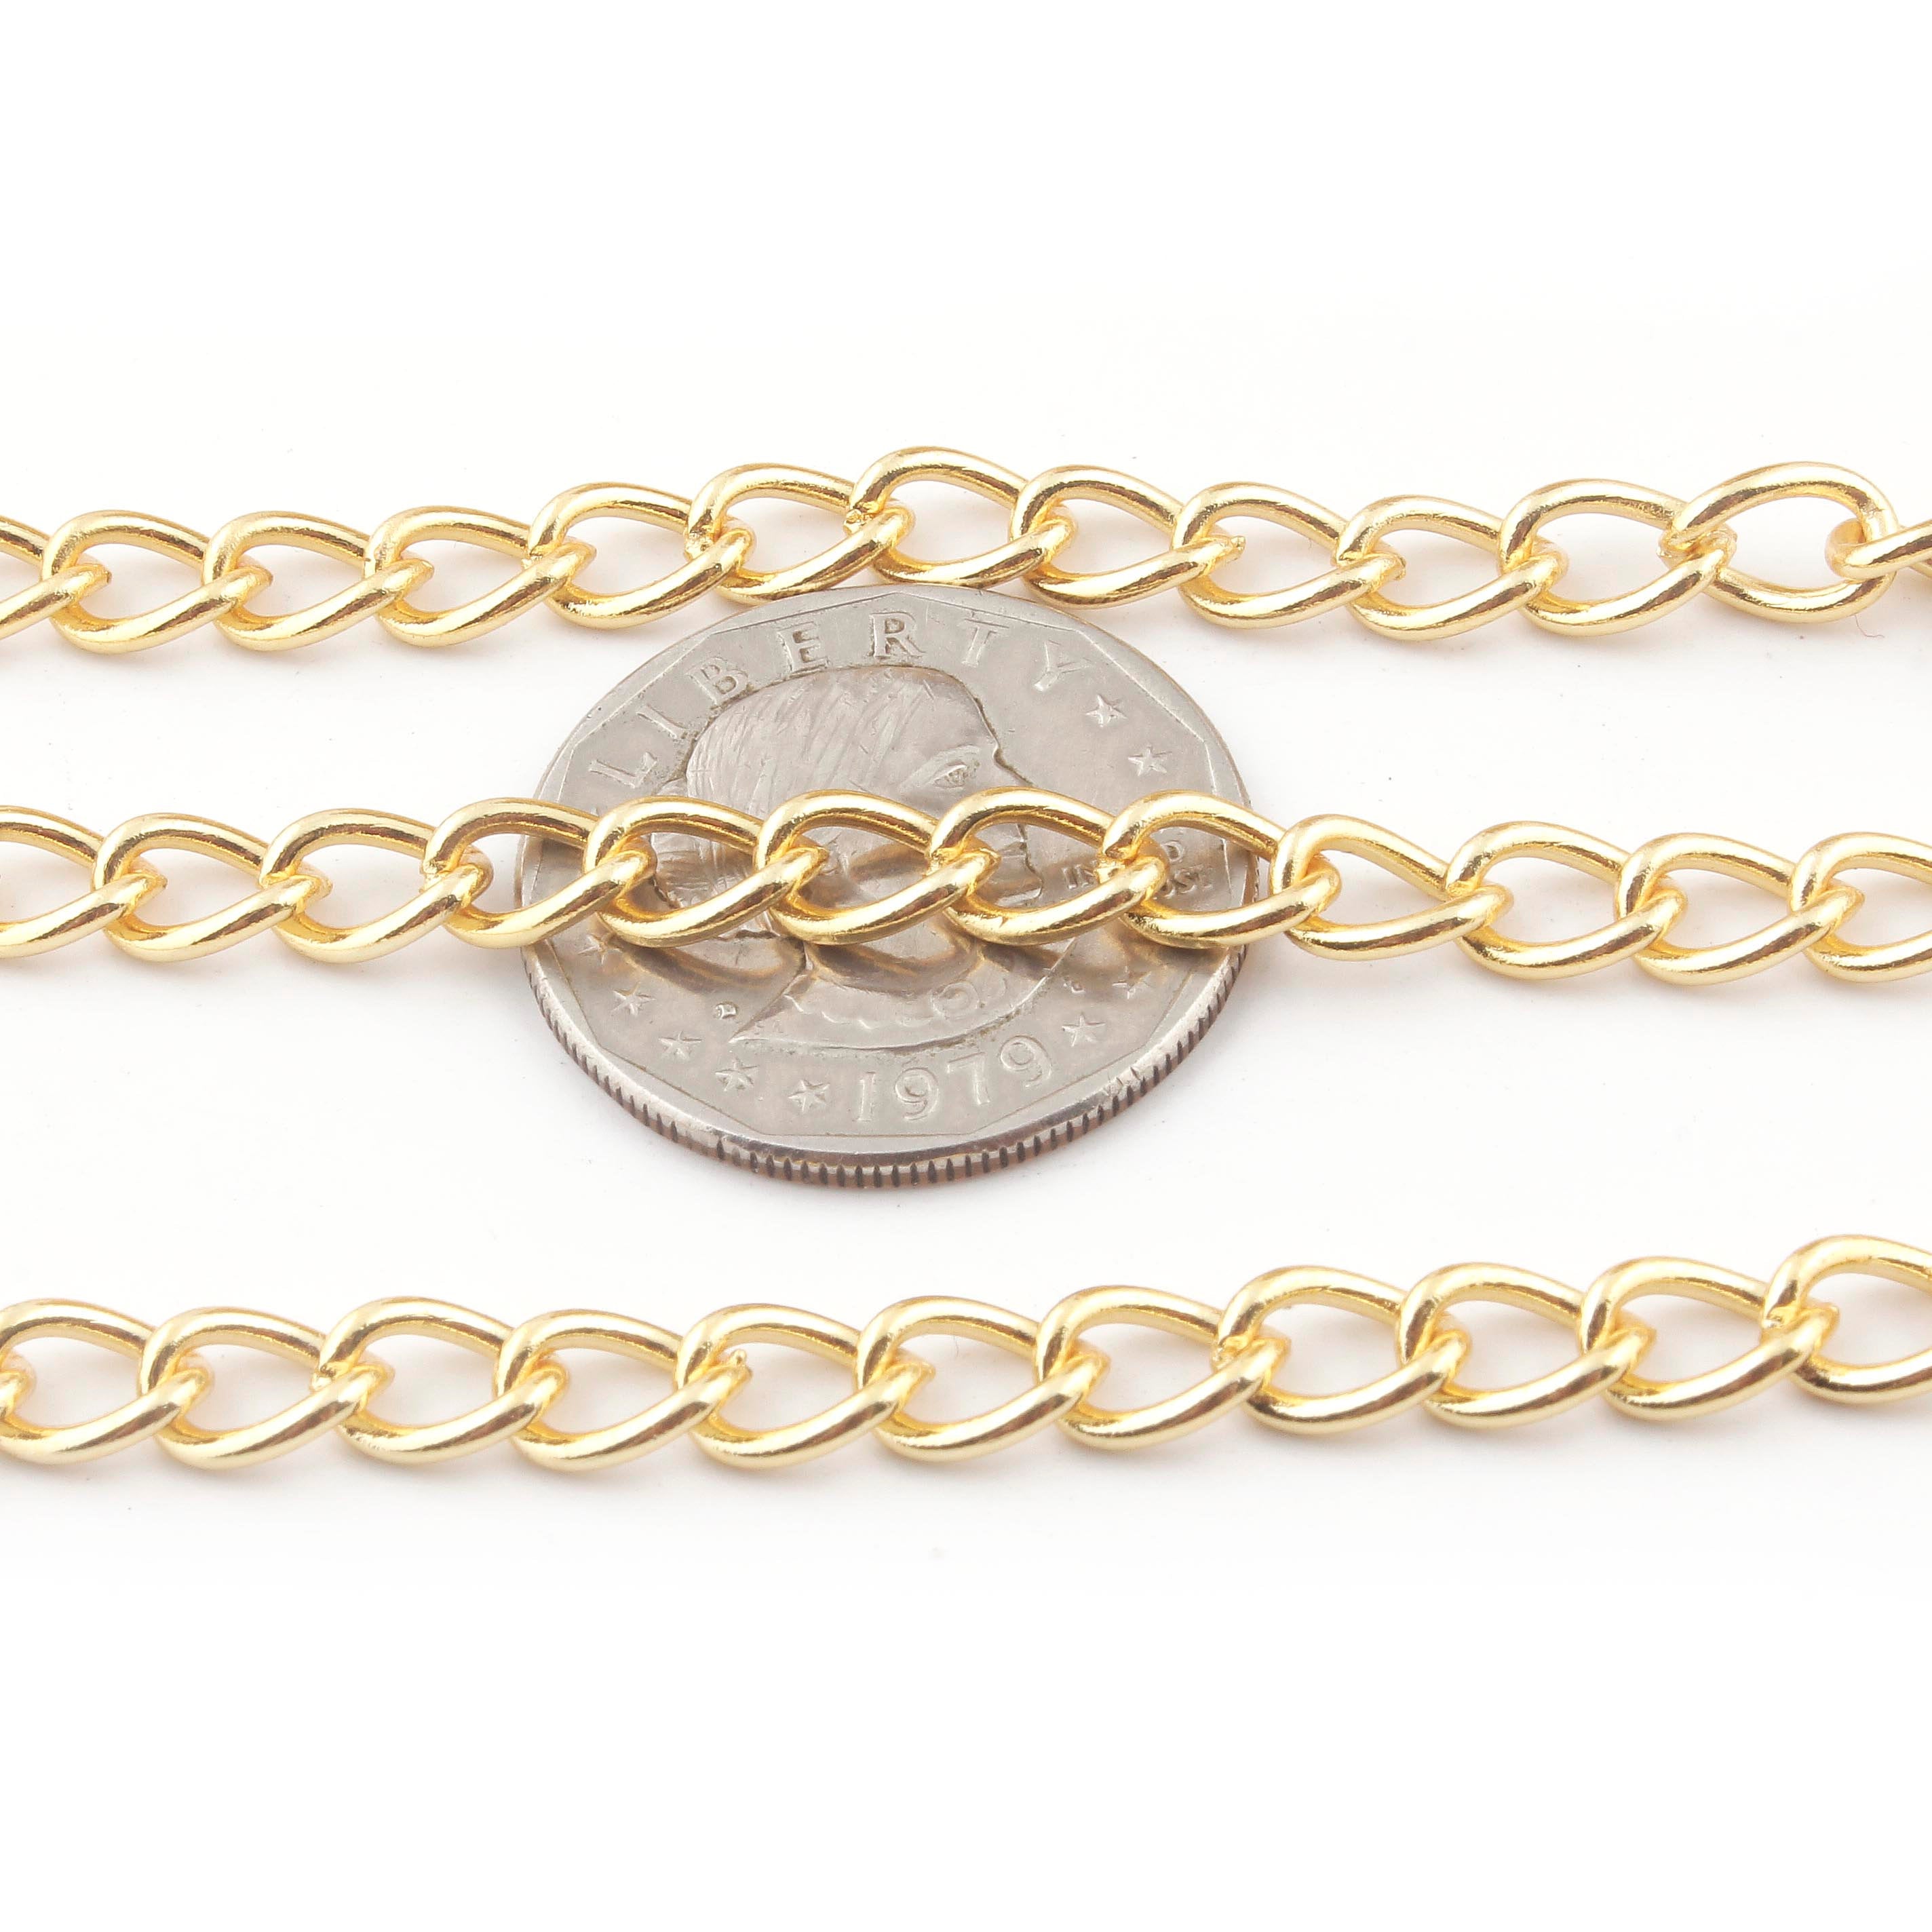 2 Feet Gold Plated Copper Chain - Cable Link Chain - Oval Chain